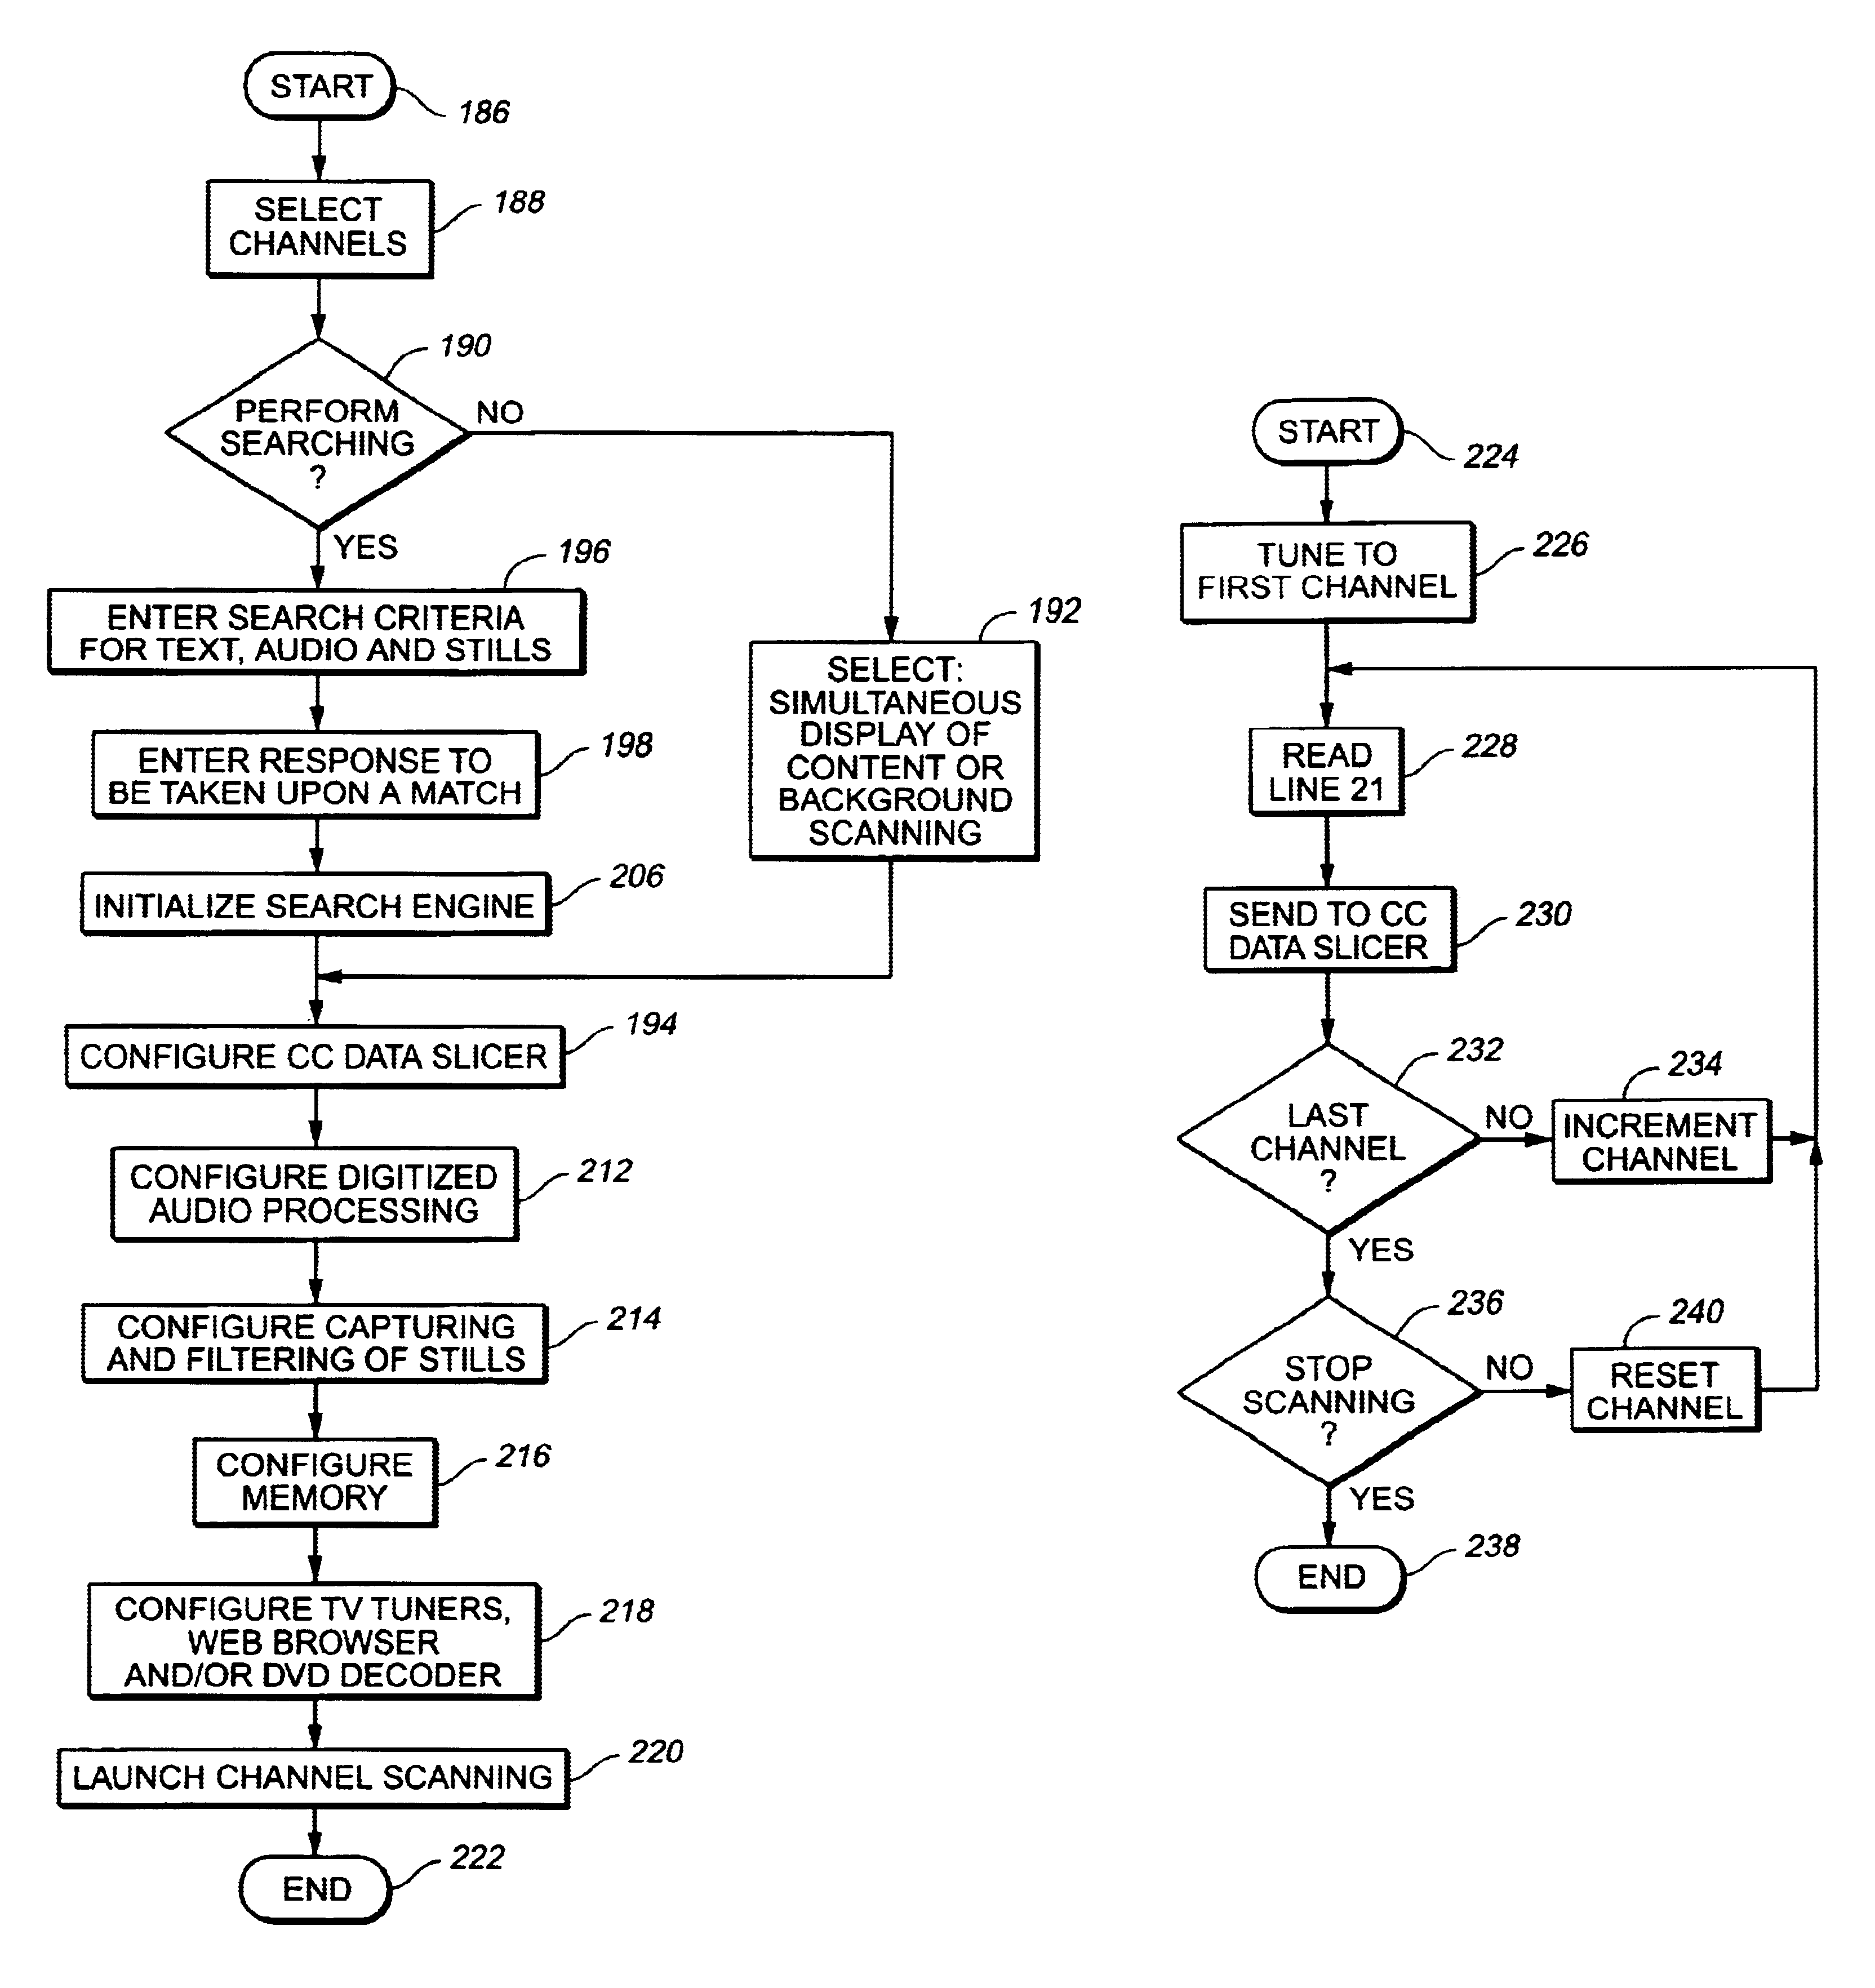 Audio/visual device for capturing, searching and/or displaying audio/visual material